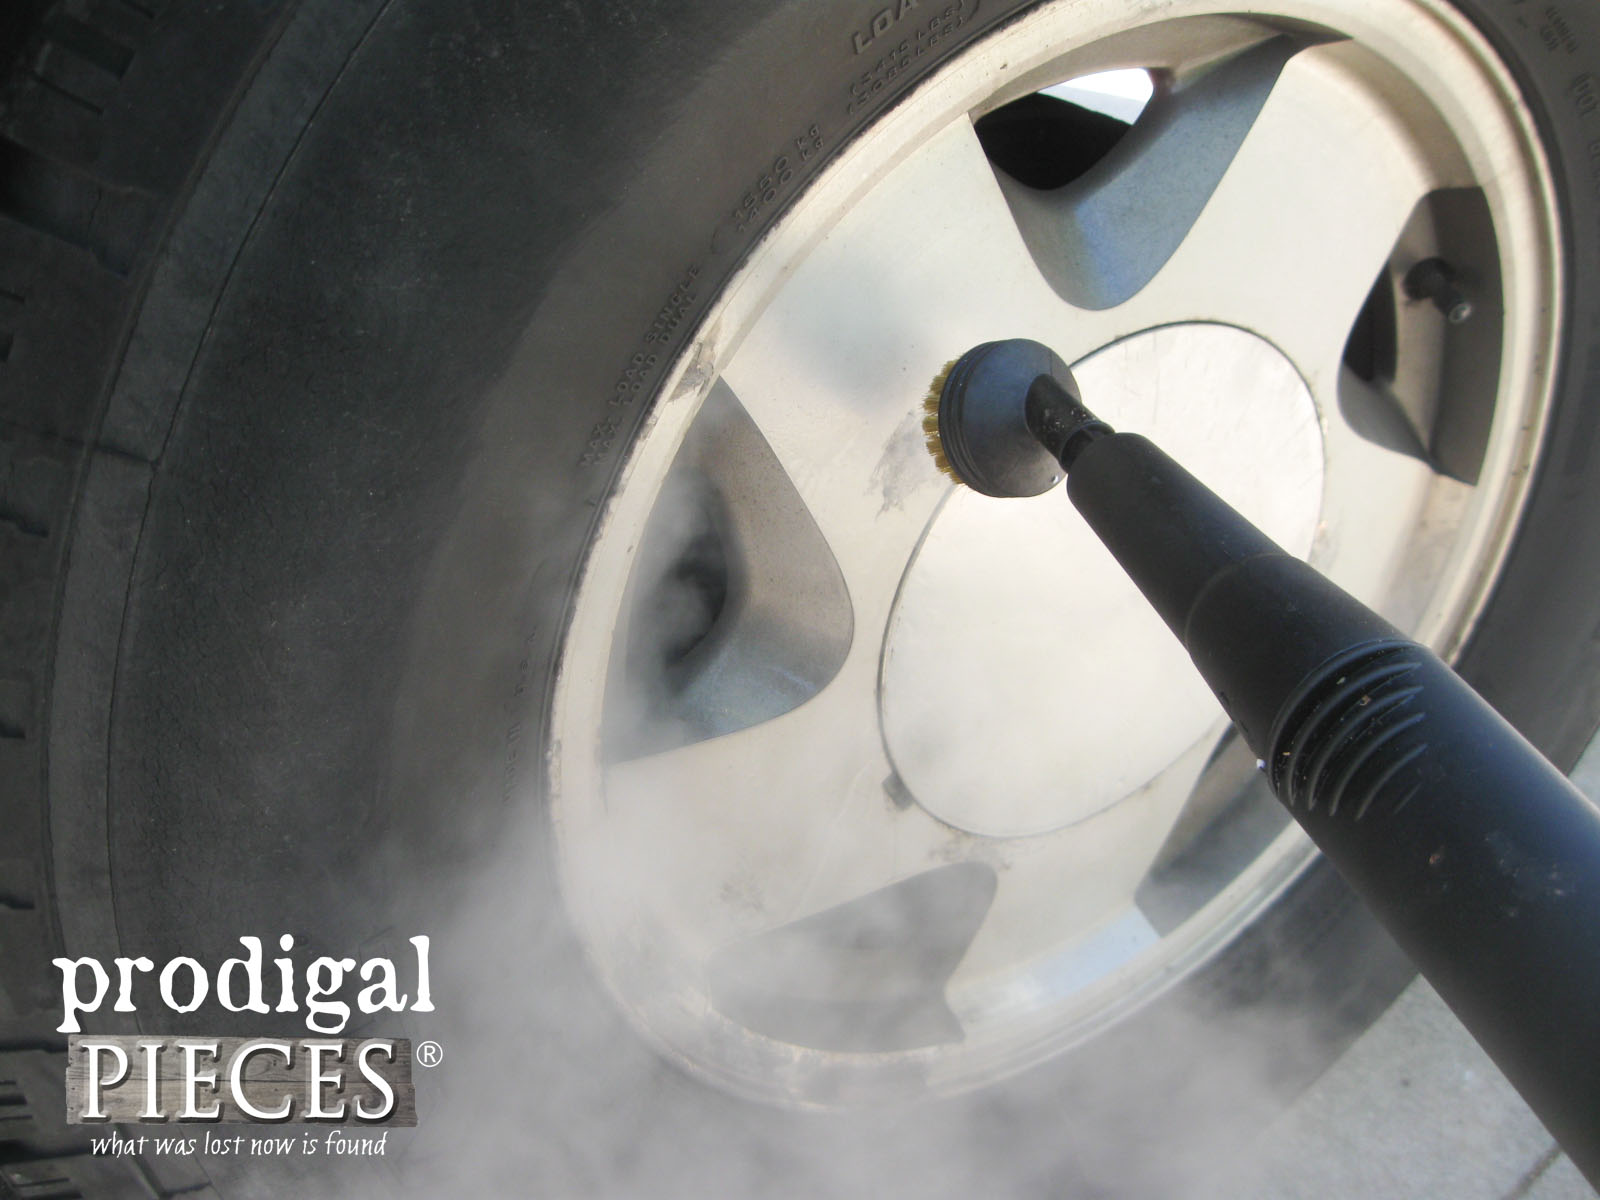 Chemical Free Tire Cleaning with the AutoRight Steam Machine by Prodigal Pieces | www.prodigalpieces.com